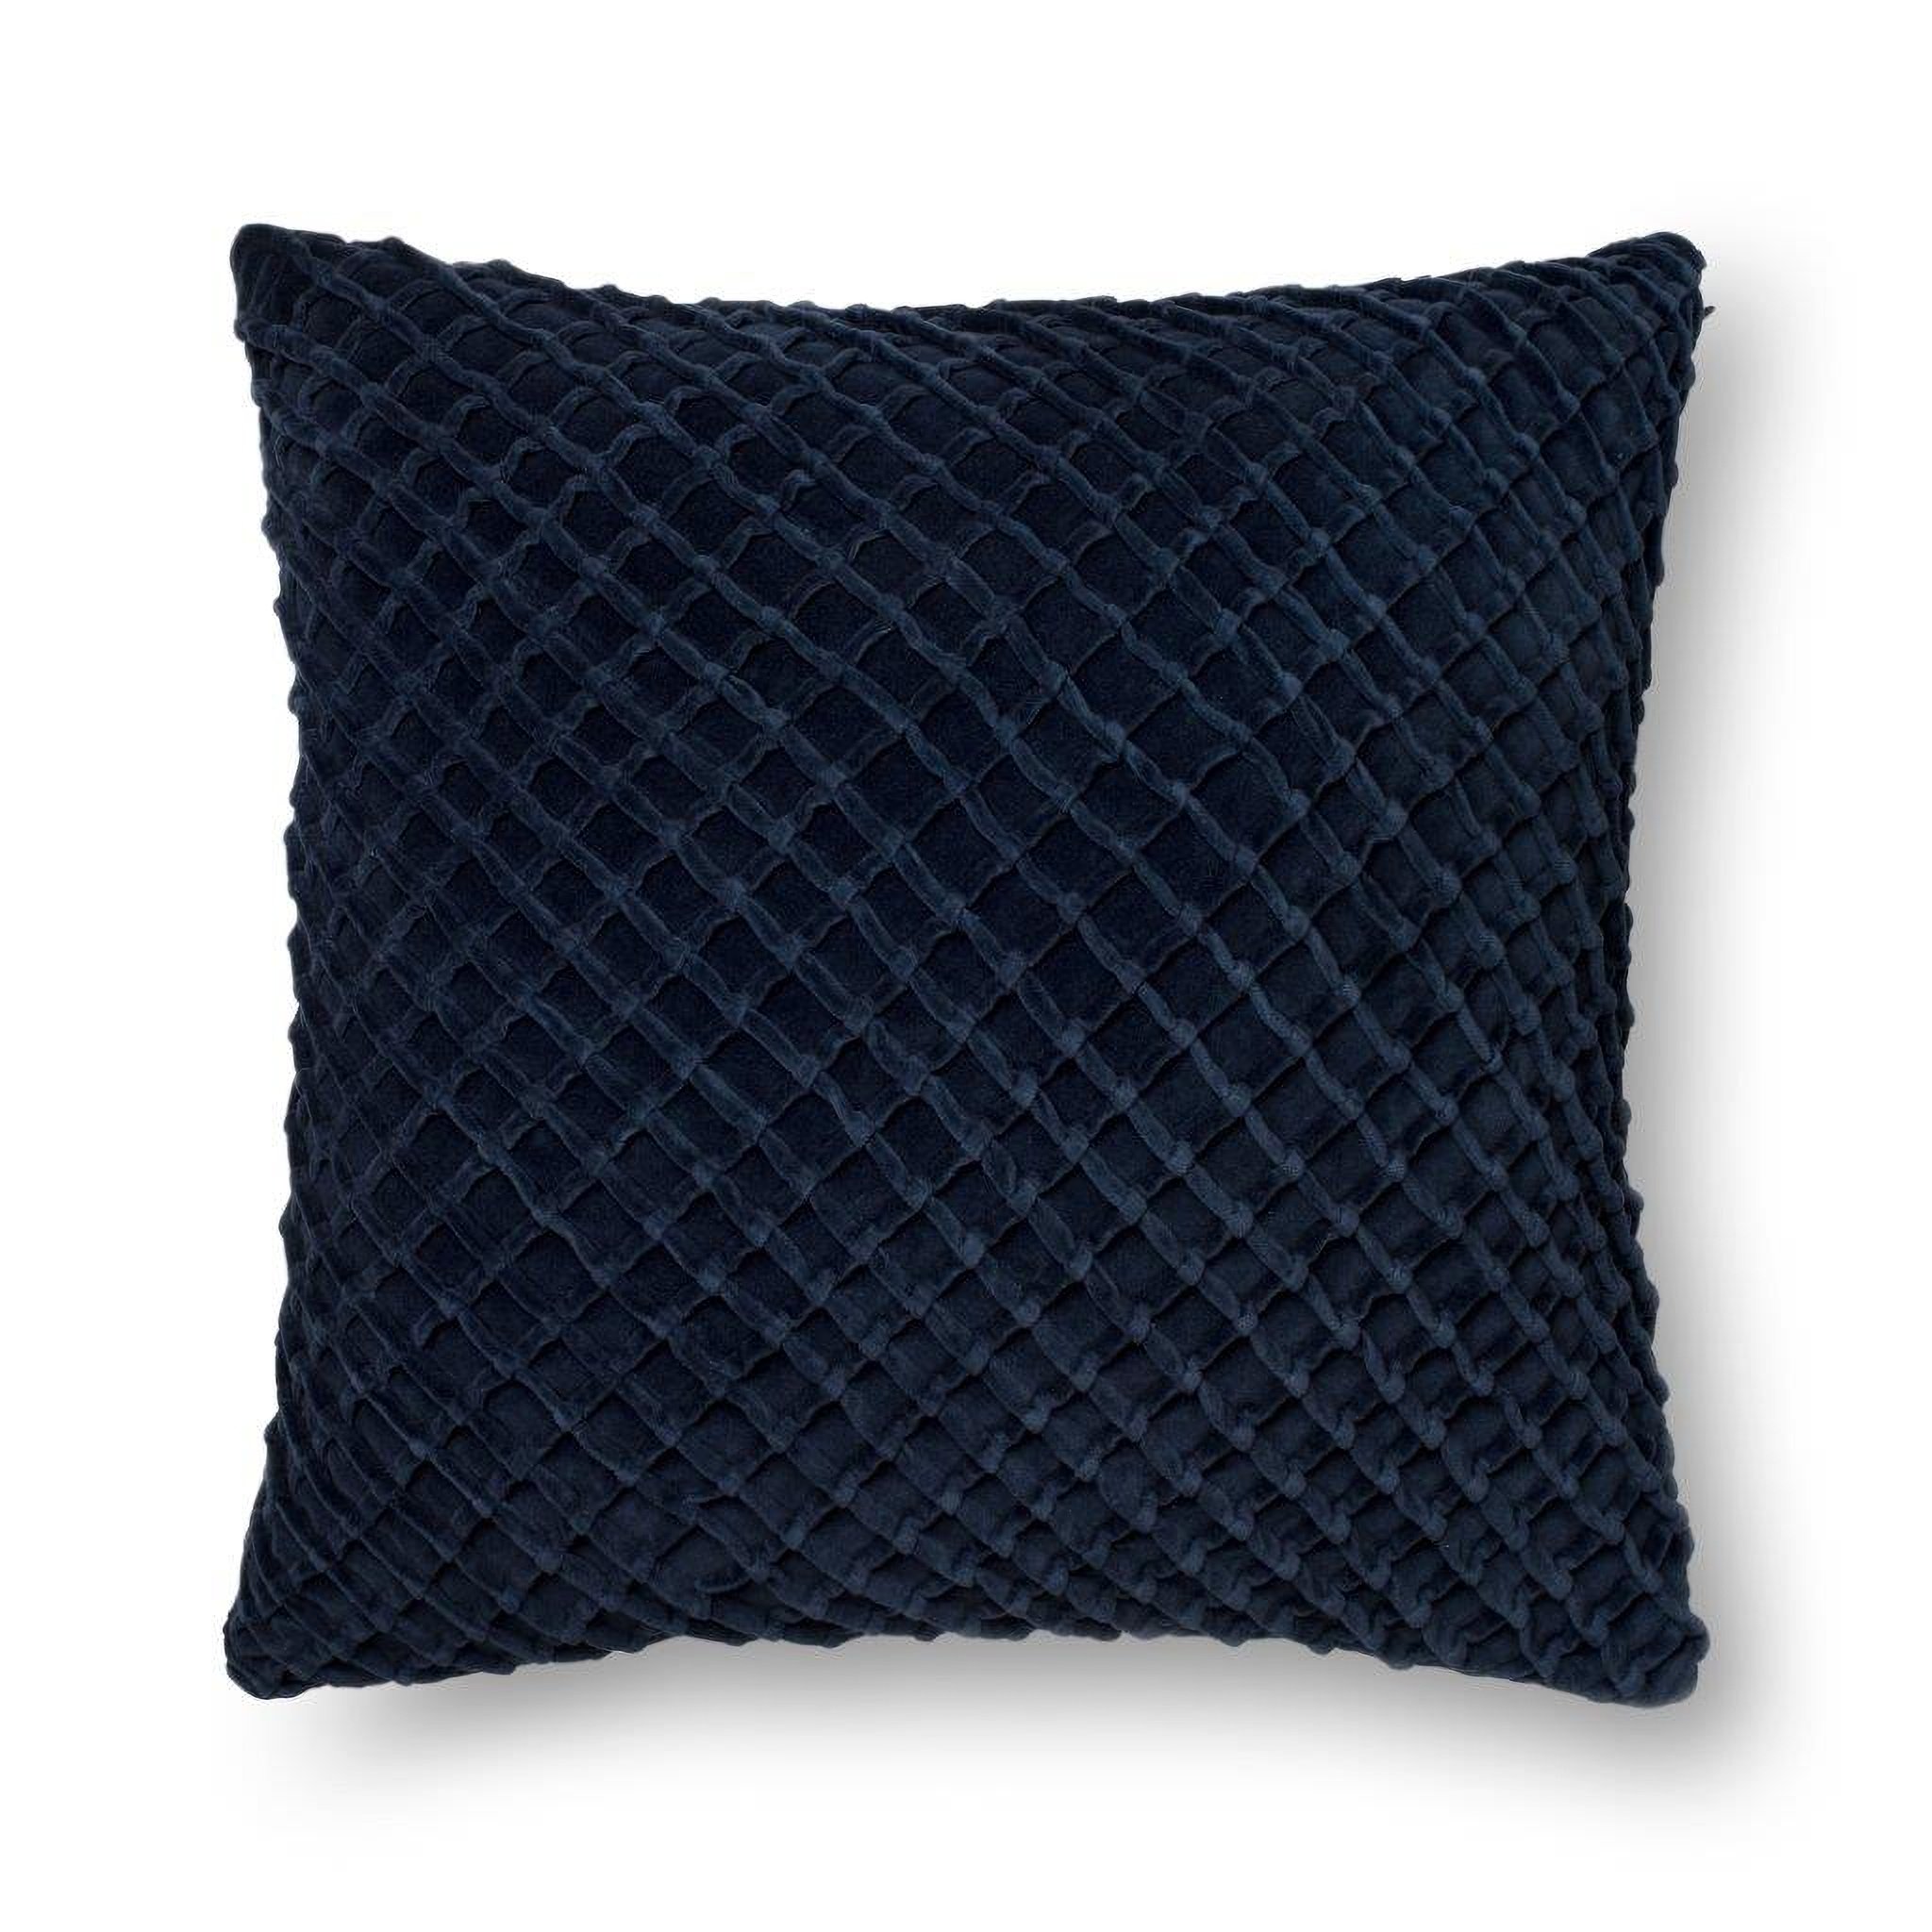  22x22 Pillow Cover Pack of of 2 Navy Blue Soft